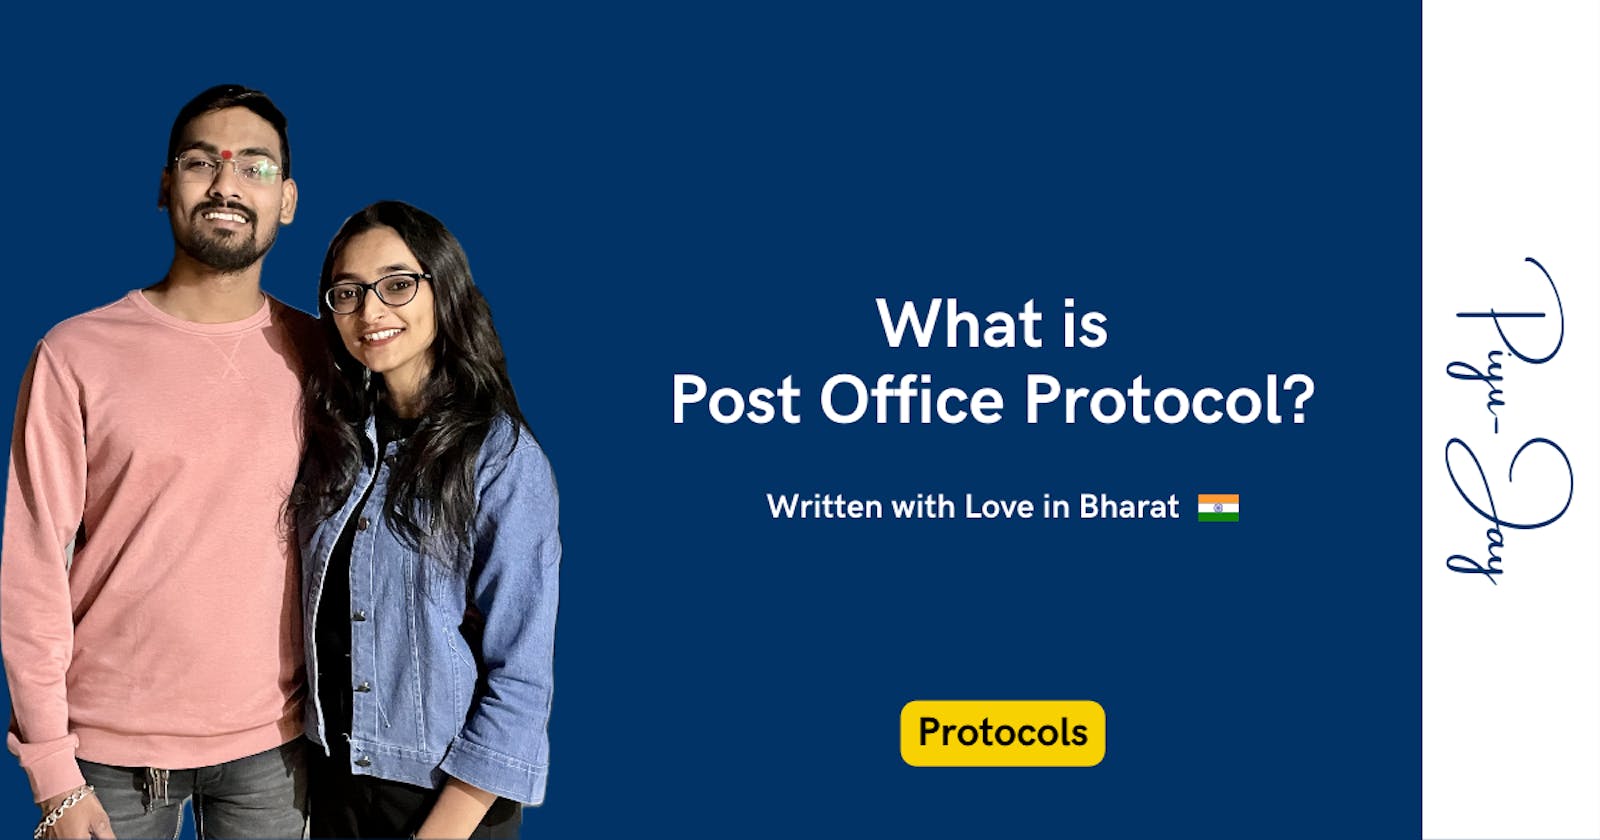 What is Post Office Protocol (POP)?